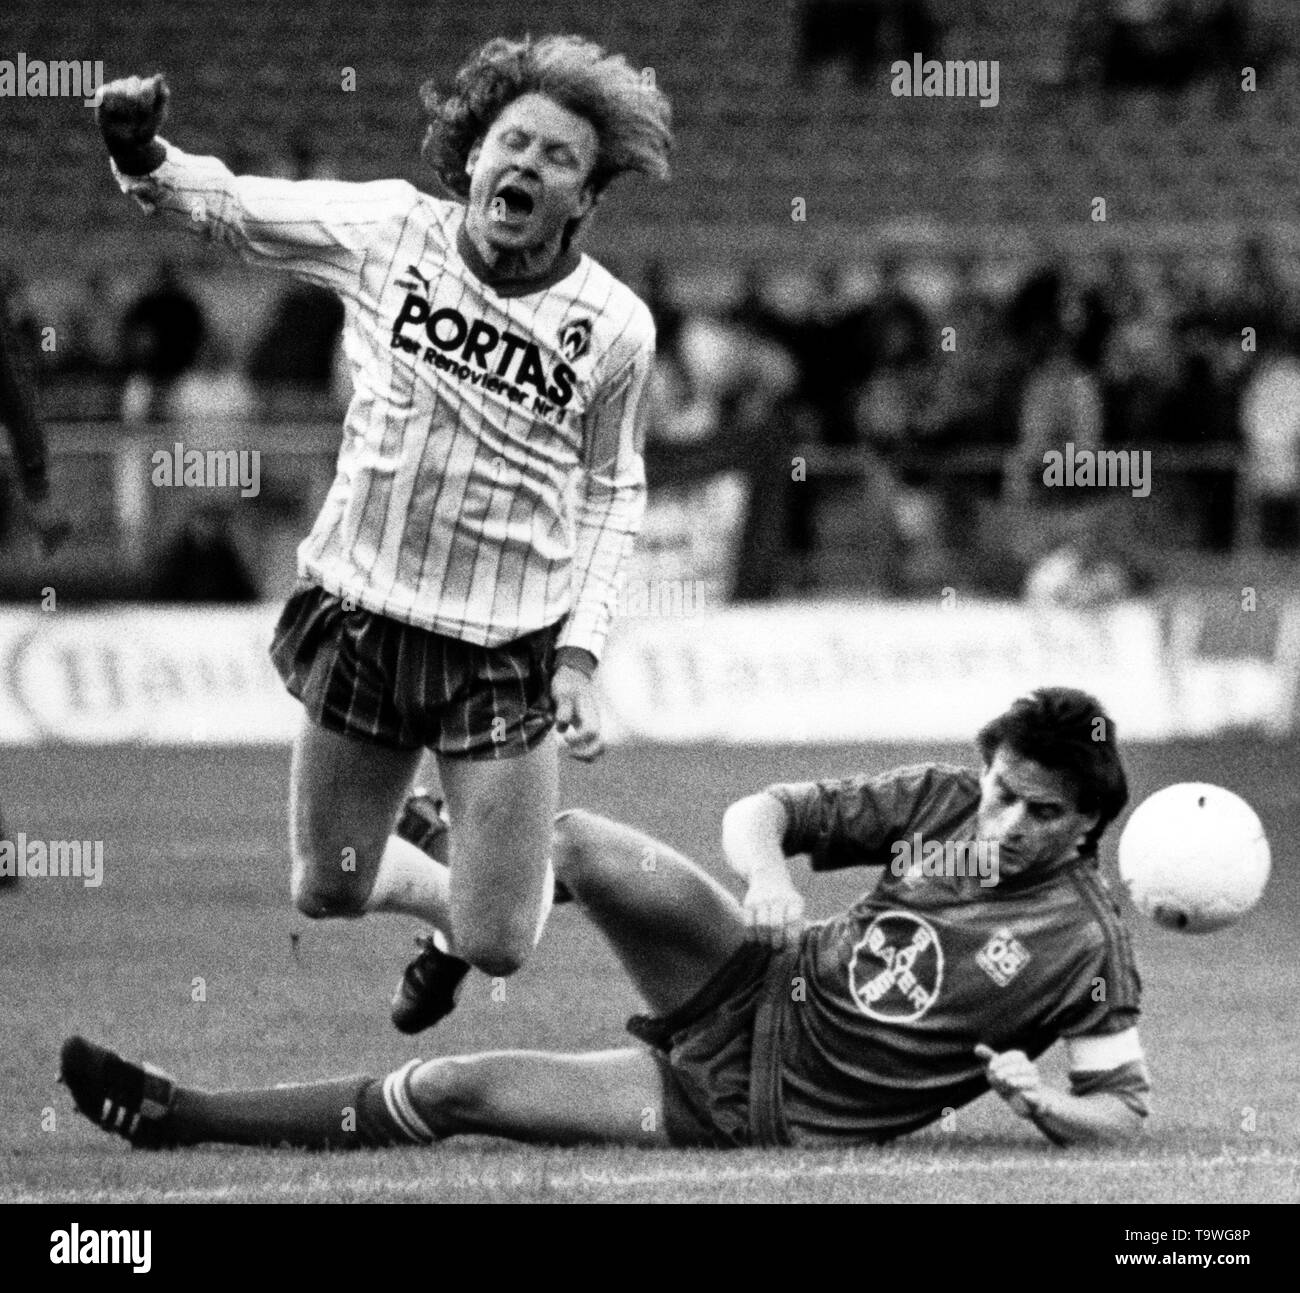 FILED - 29 October 1988, Bremen: Football SV Werder Bremen - Bayer 05 Uerdingen in the Weserstadion. Bremen striker Manfred Burgsmüller (l) is brought down in a duel by Uerdingen captain Matthias Herget with a tackle. The former footballer Manfred Burgsmüller is dead. The former player from Borussia Dortmund and Werder Bremen died at the age of 69, according to the police in Essen on Tuesday (21.05.2019). Photo: Ingo Wagner/dpa Stock Photo